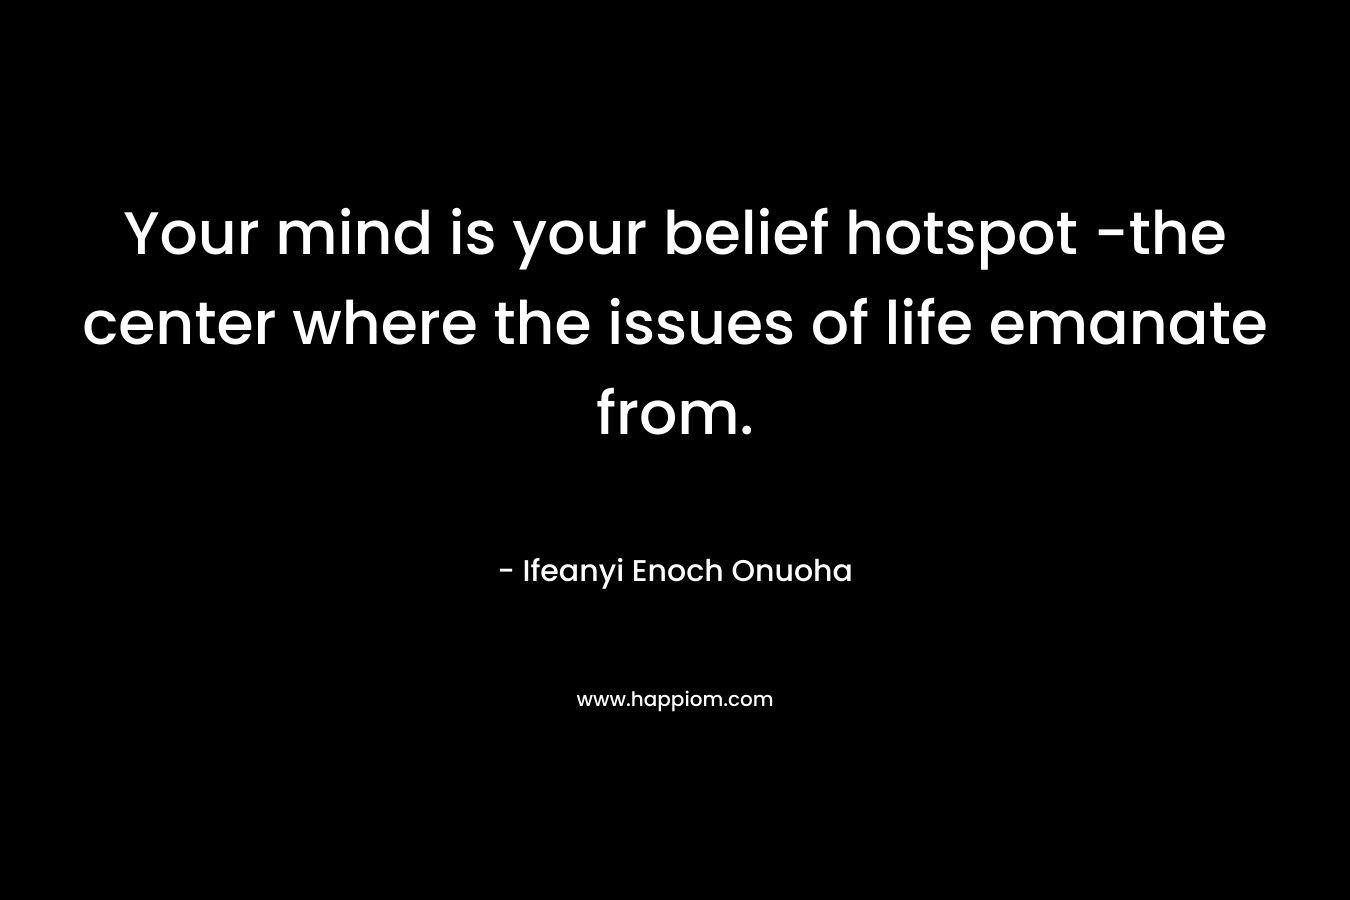 Your mind is your belief hotspot -the center where the issues of life emanate from. – Ifeanyi Enoch Onuoha